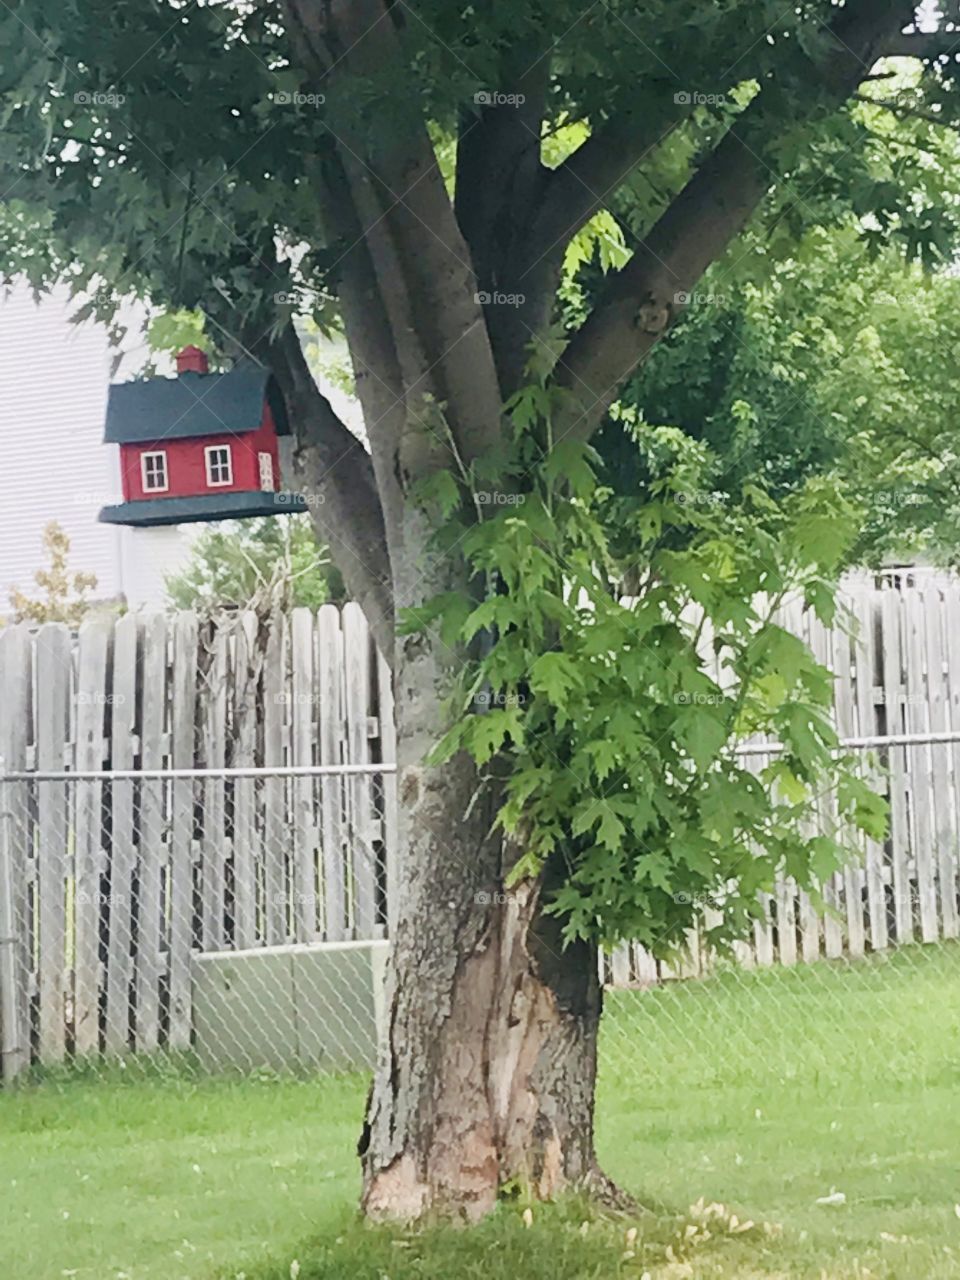 Backyard tree with a red bird house